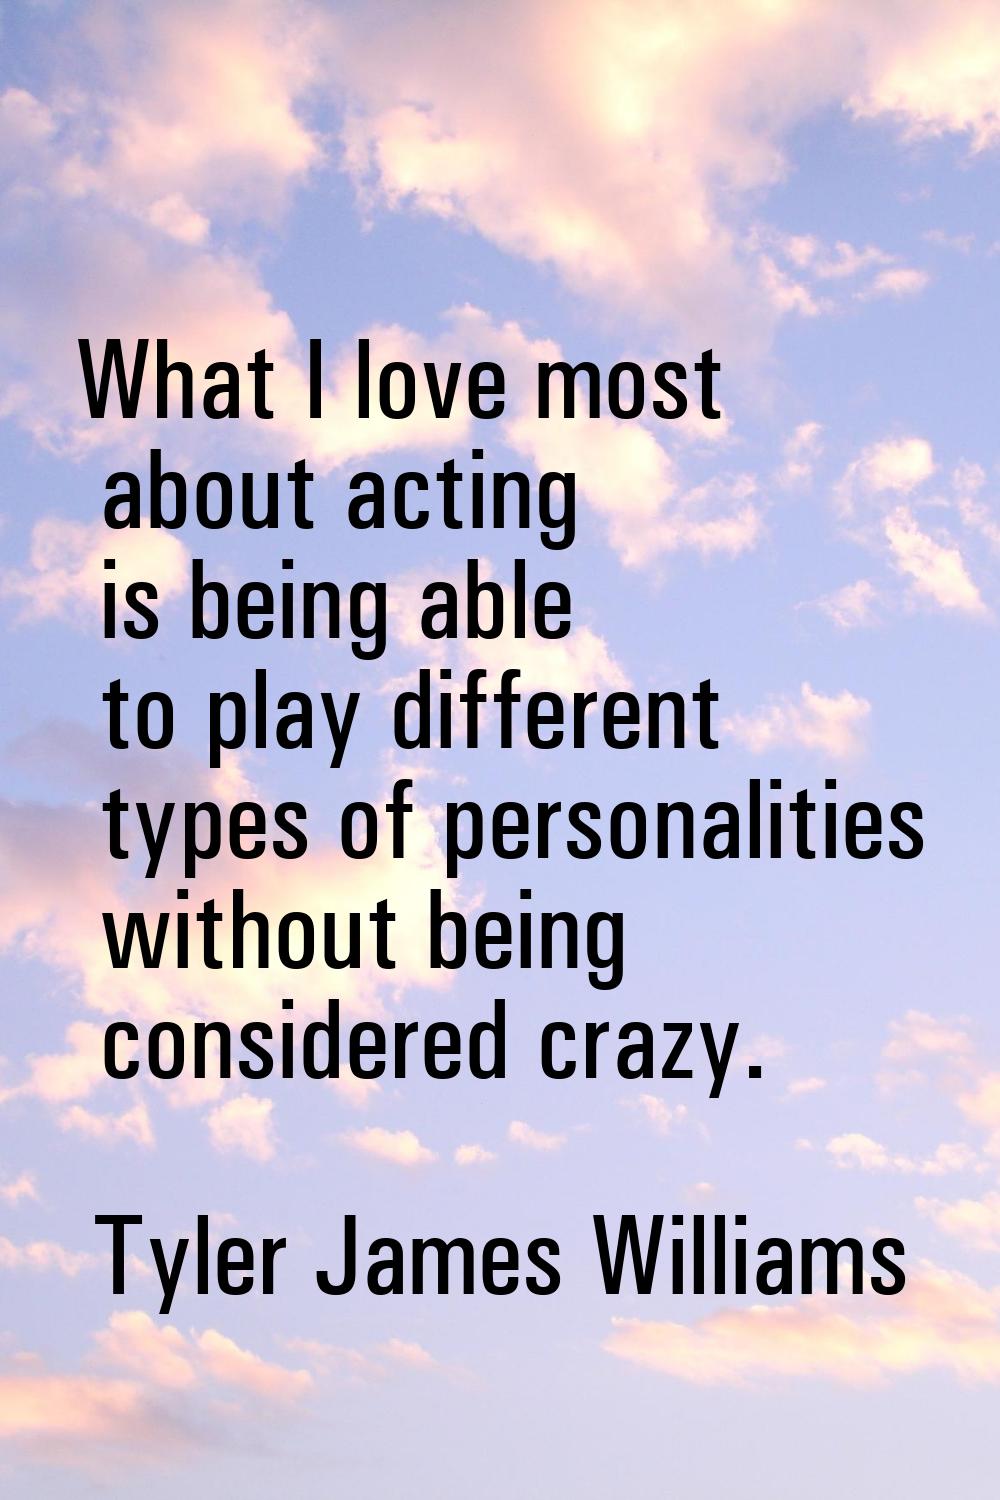 What I love most about acting is being able to play different types of personalities without being 